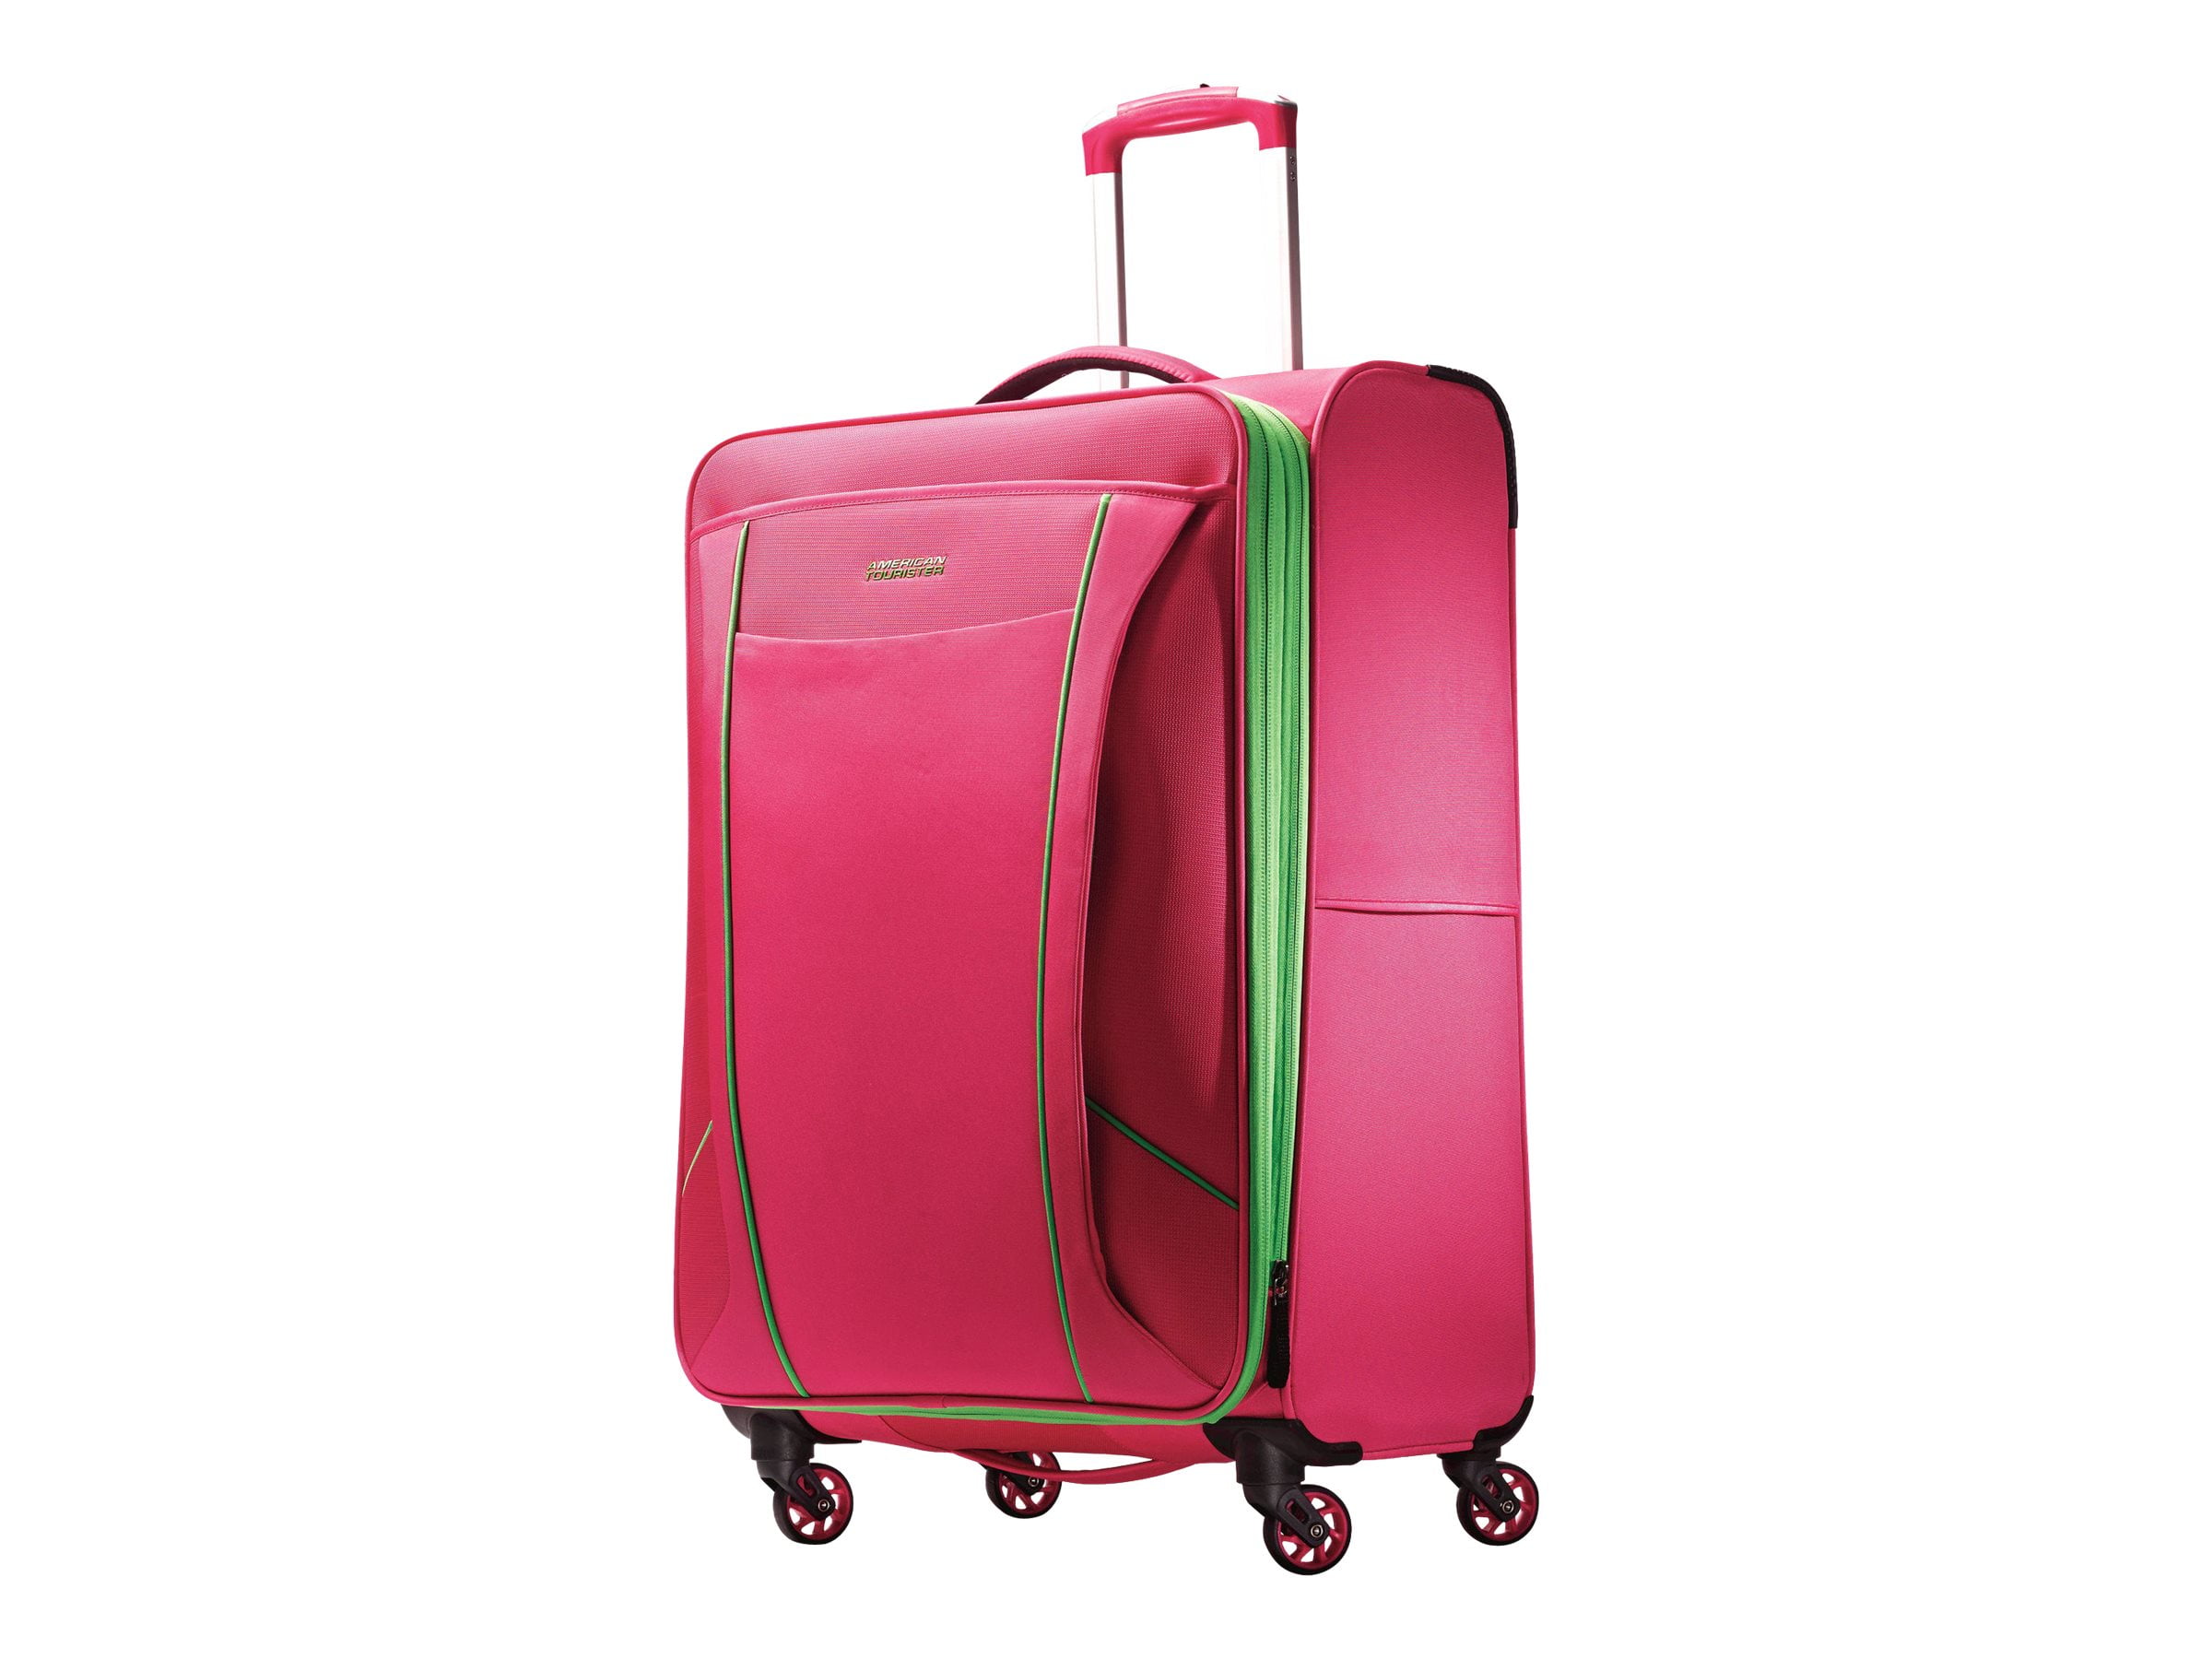 American Tourister - American Tourister Skylite - Spinner - 600D x 600D ...